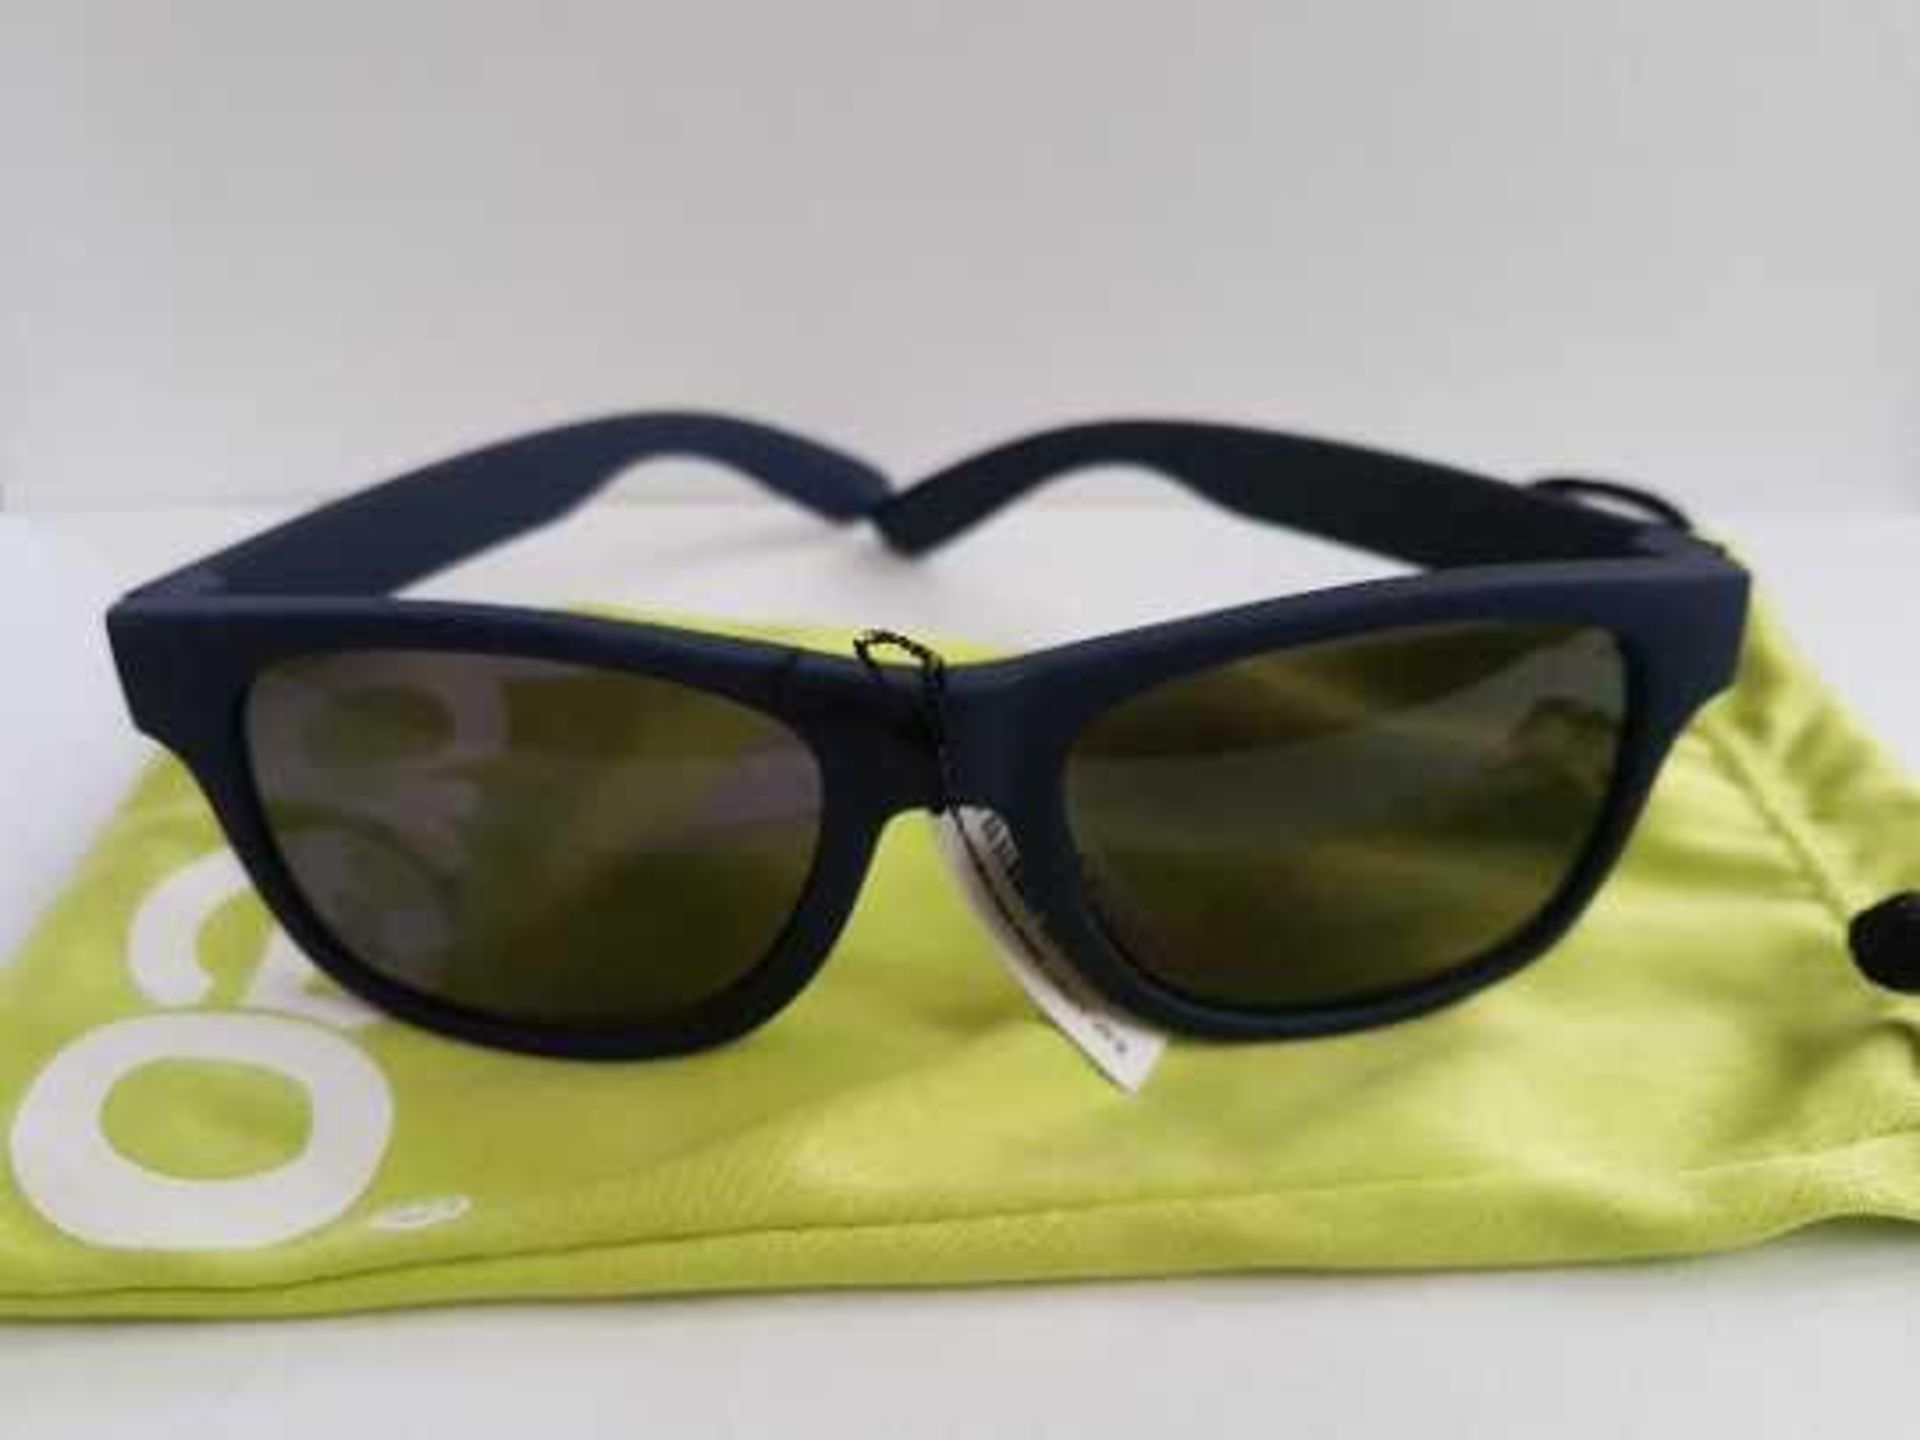 2x Breo uptone junior sunglasses in navy, new and factory sealed in packaging. - Image 2 of 4